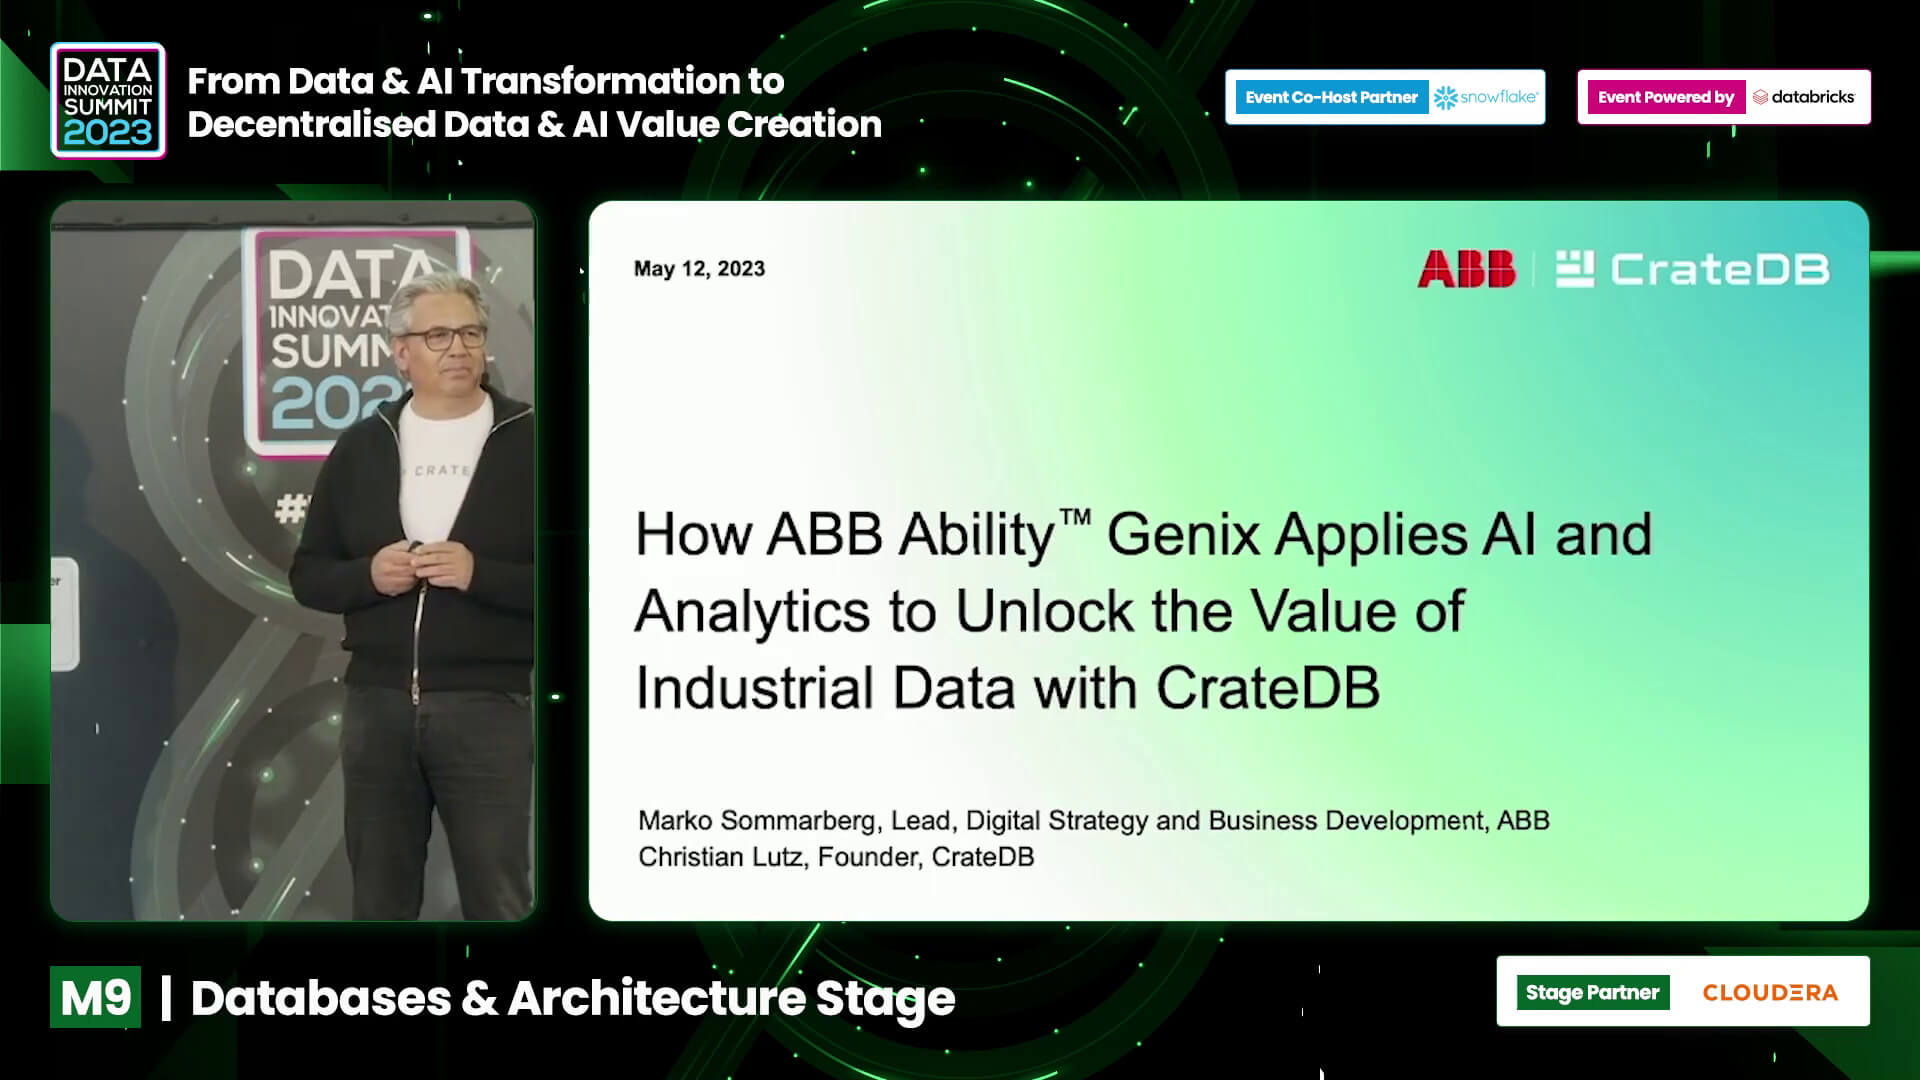 How ABB Ability™ Genix applies AI and analytics to unlock the value of industrial data with CrateDB